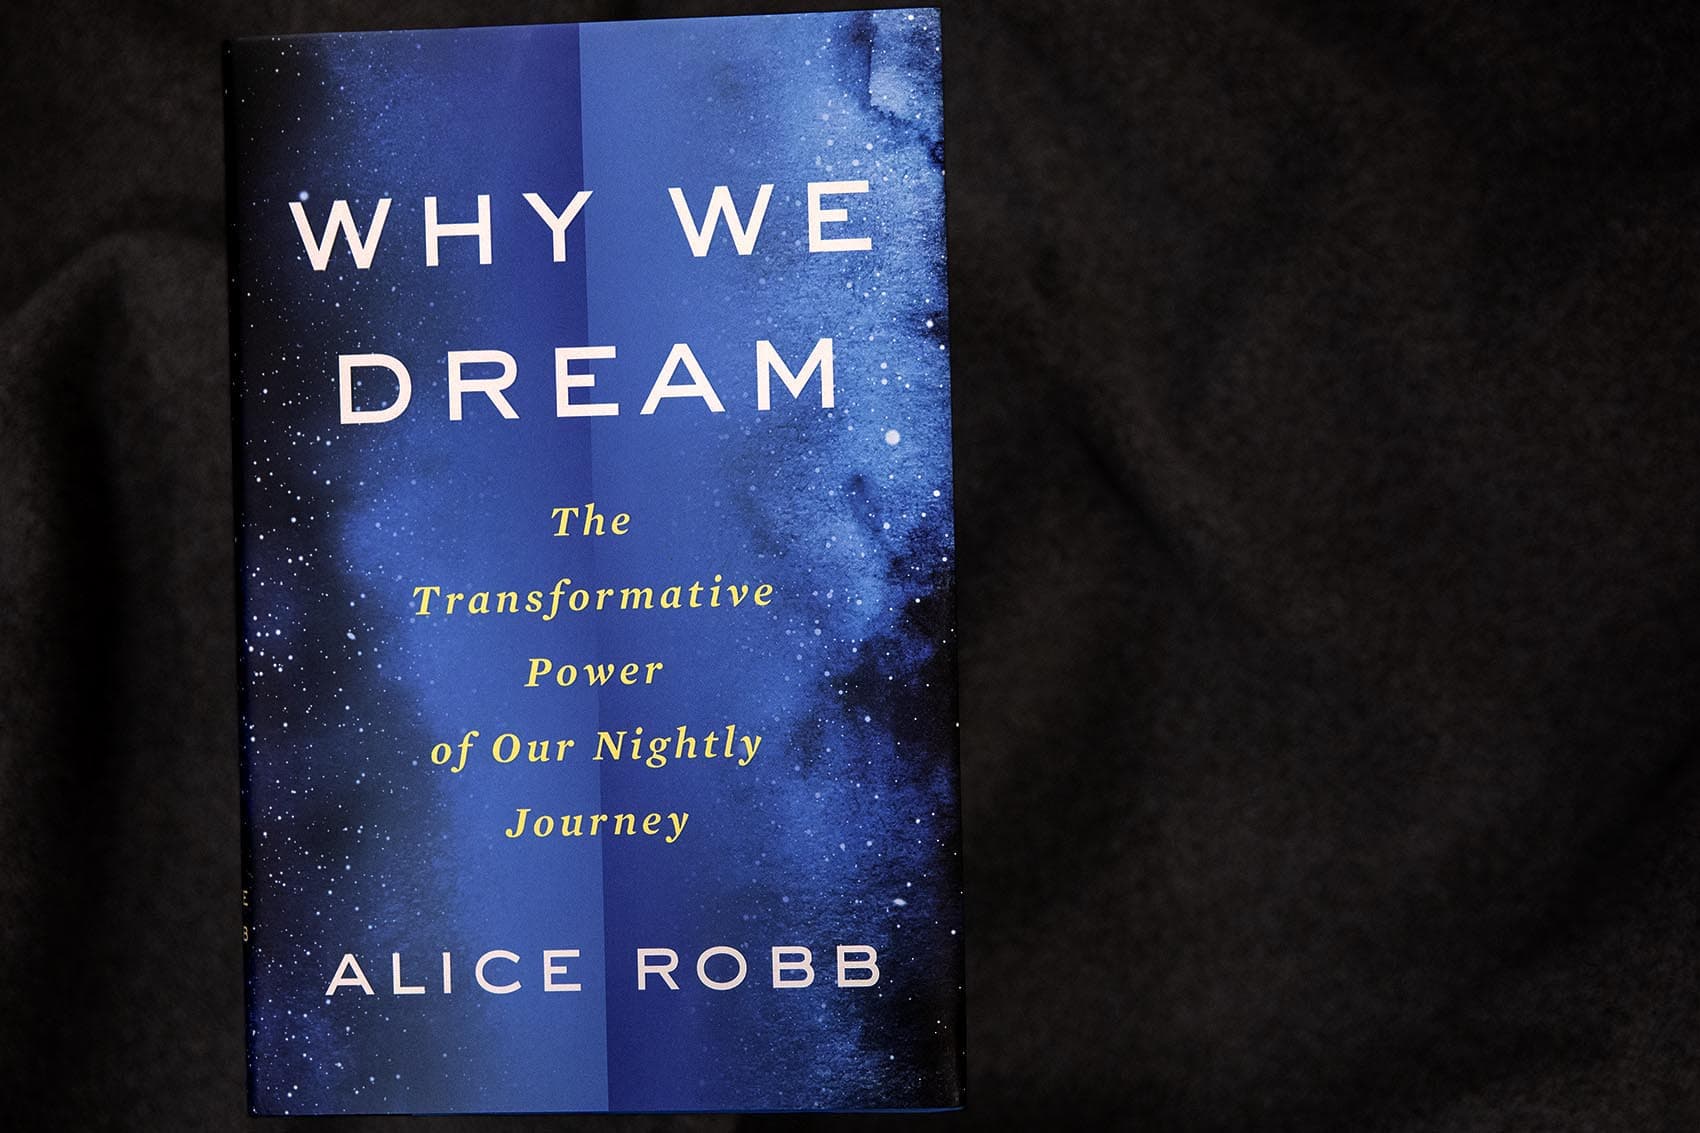 In Your Dreams New Book Goes Inside The Transformative Power Of Our Nightly Journey WBUR